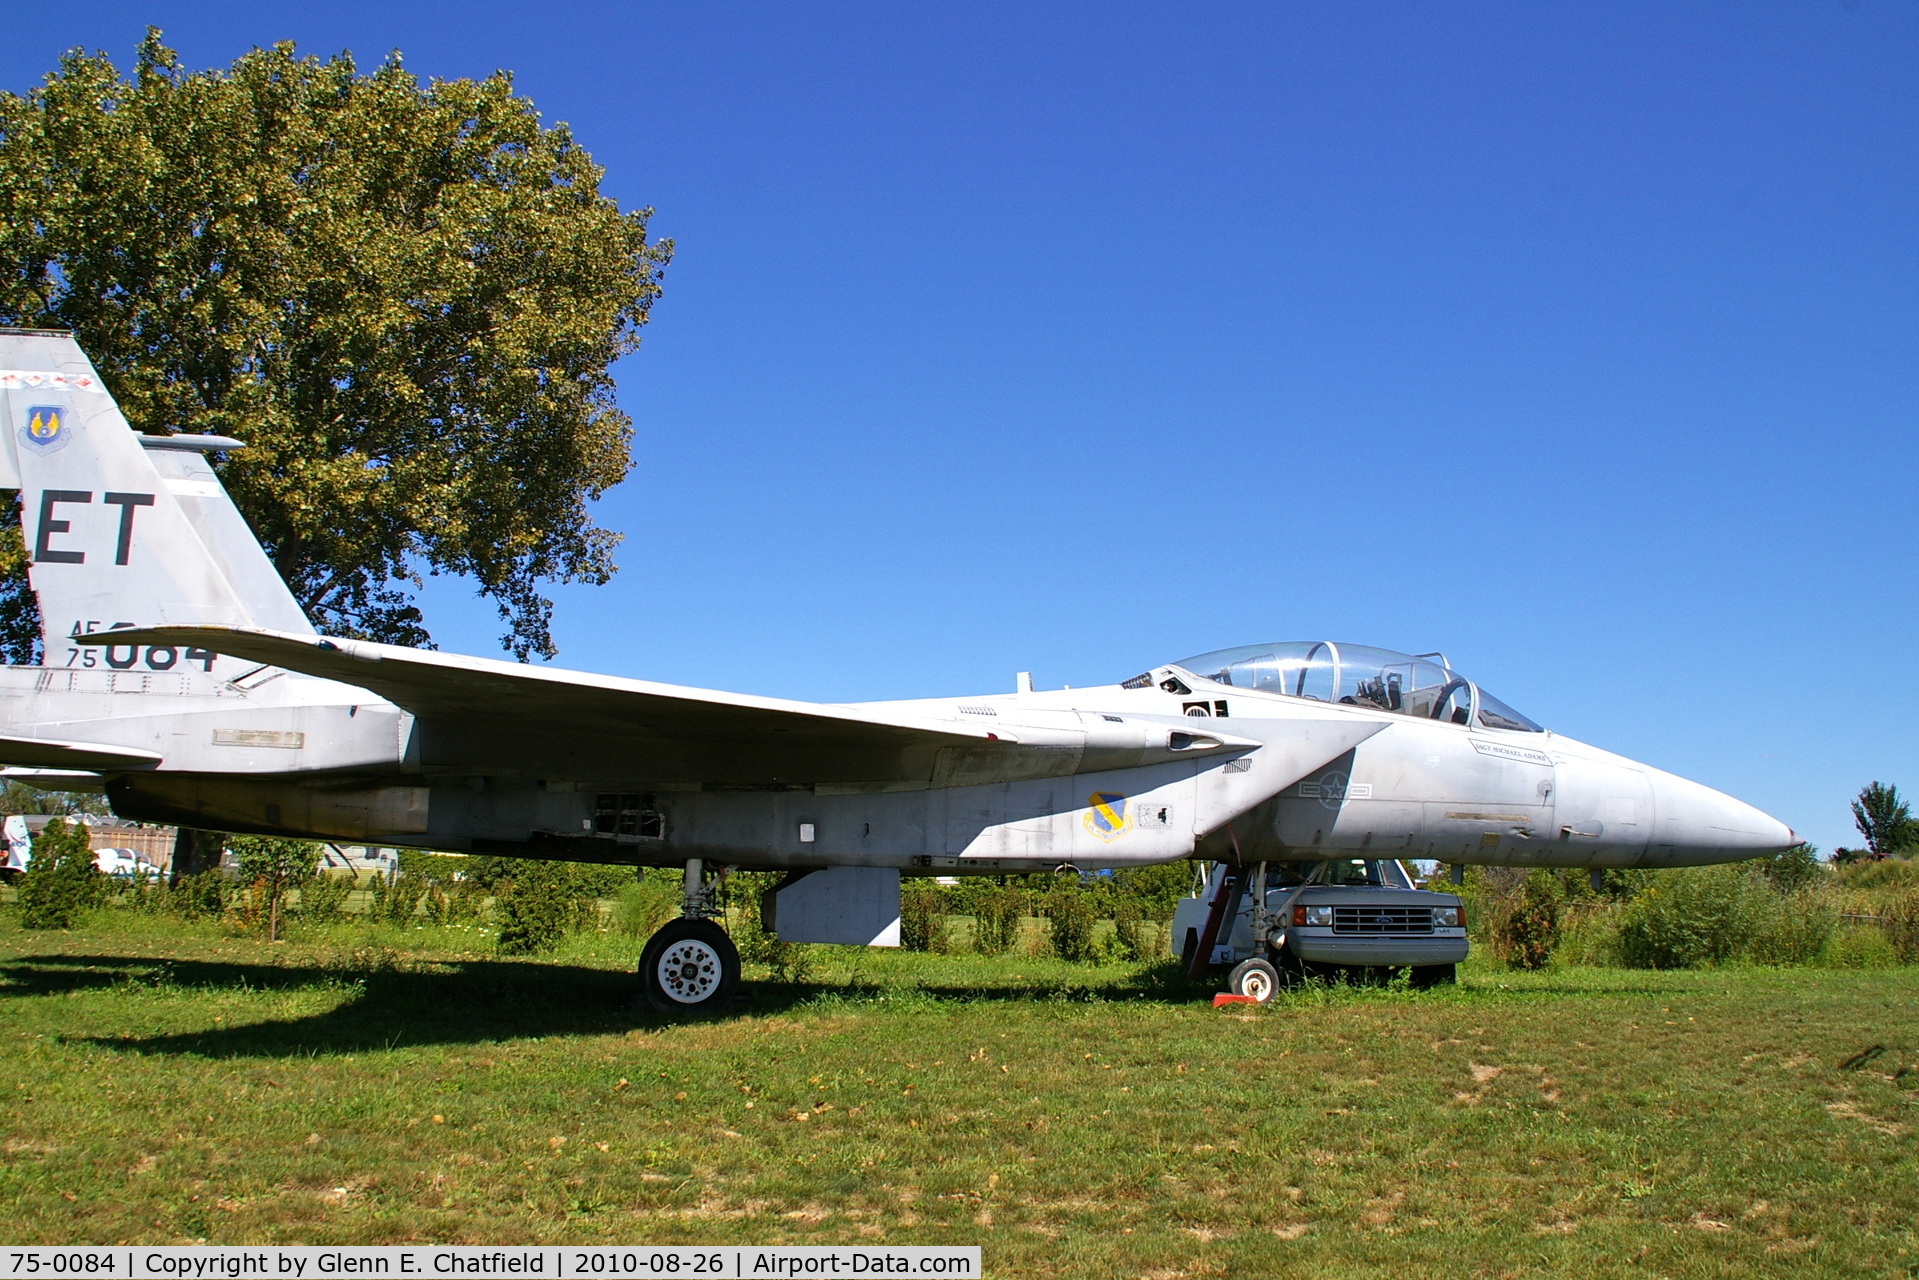 75-0084, 1975 McDonnell Douglas F-15B Eagle C/N 0143/B020, Russell Military Museum